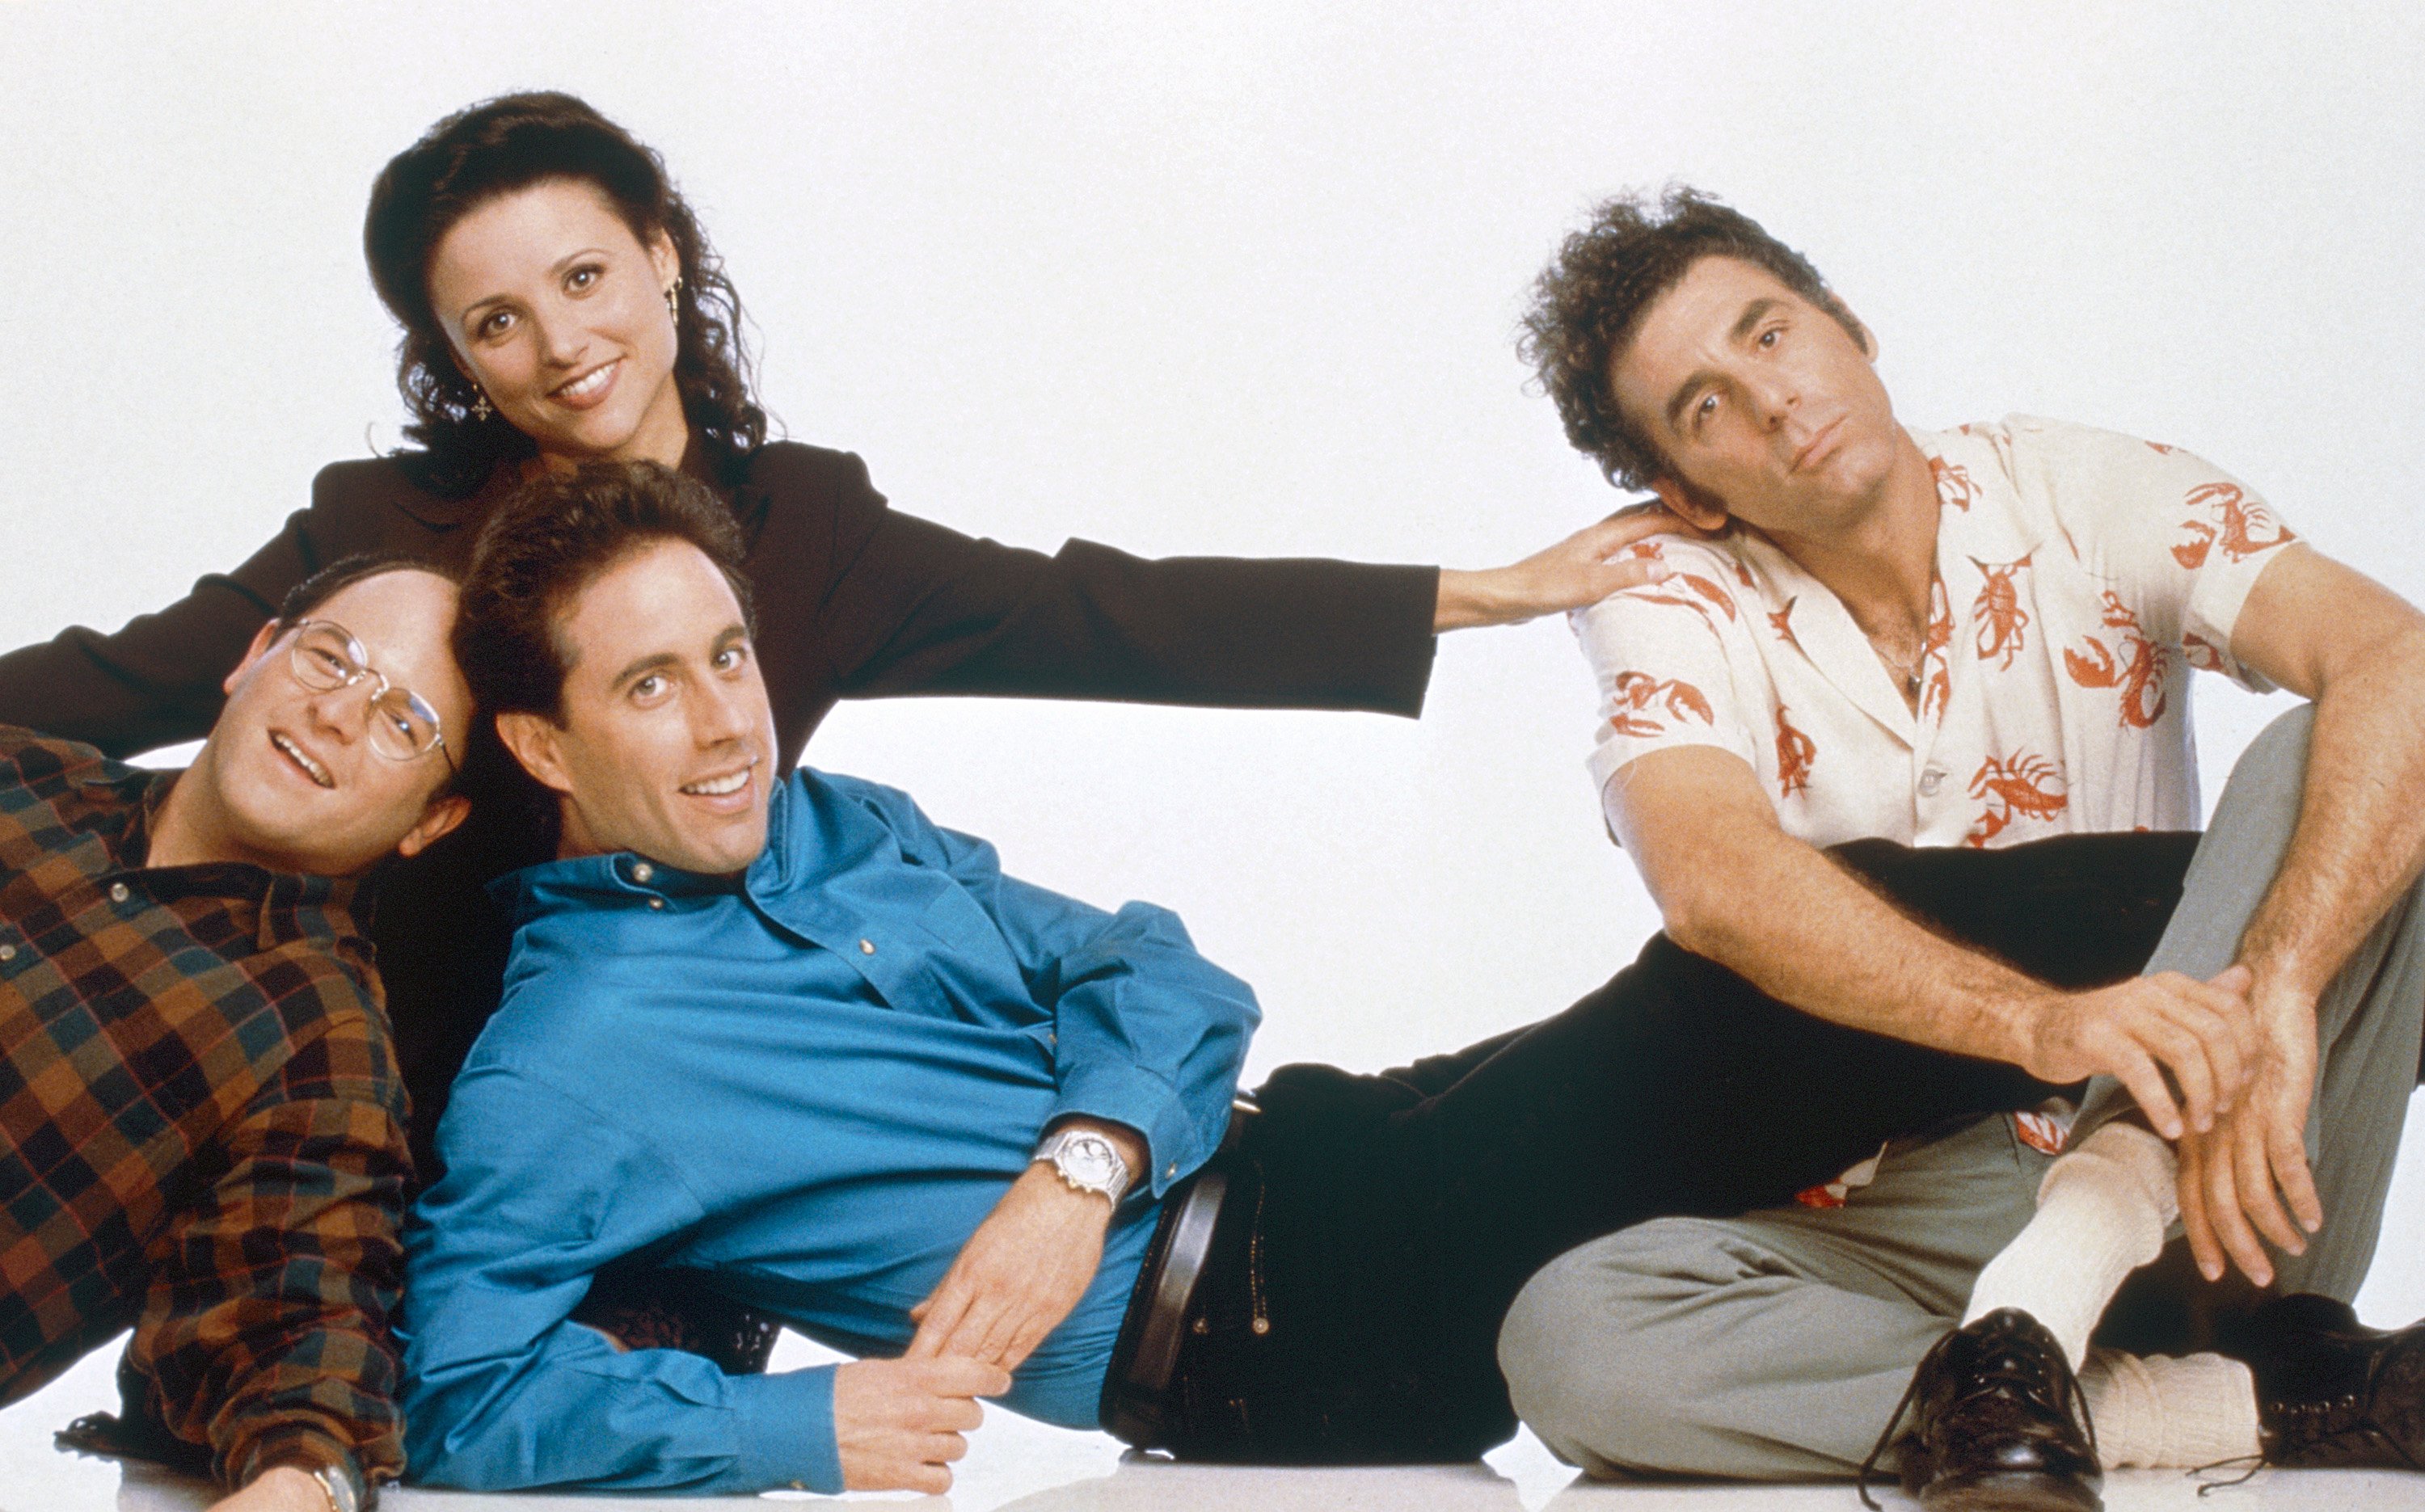 The cast of 'Seinfeld' in promotional photos for the series